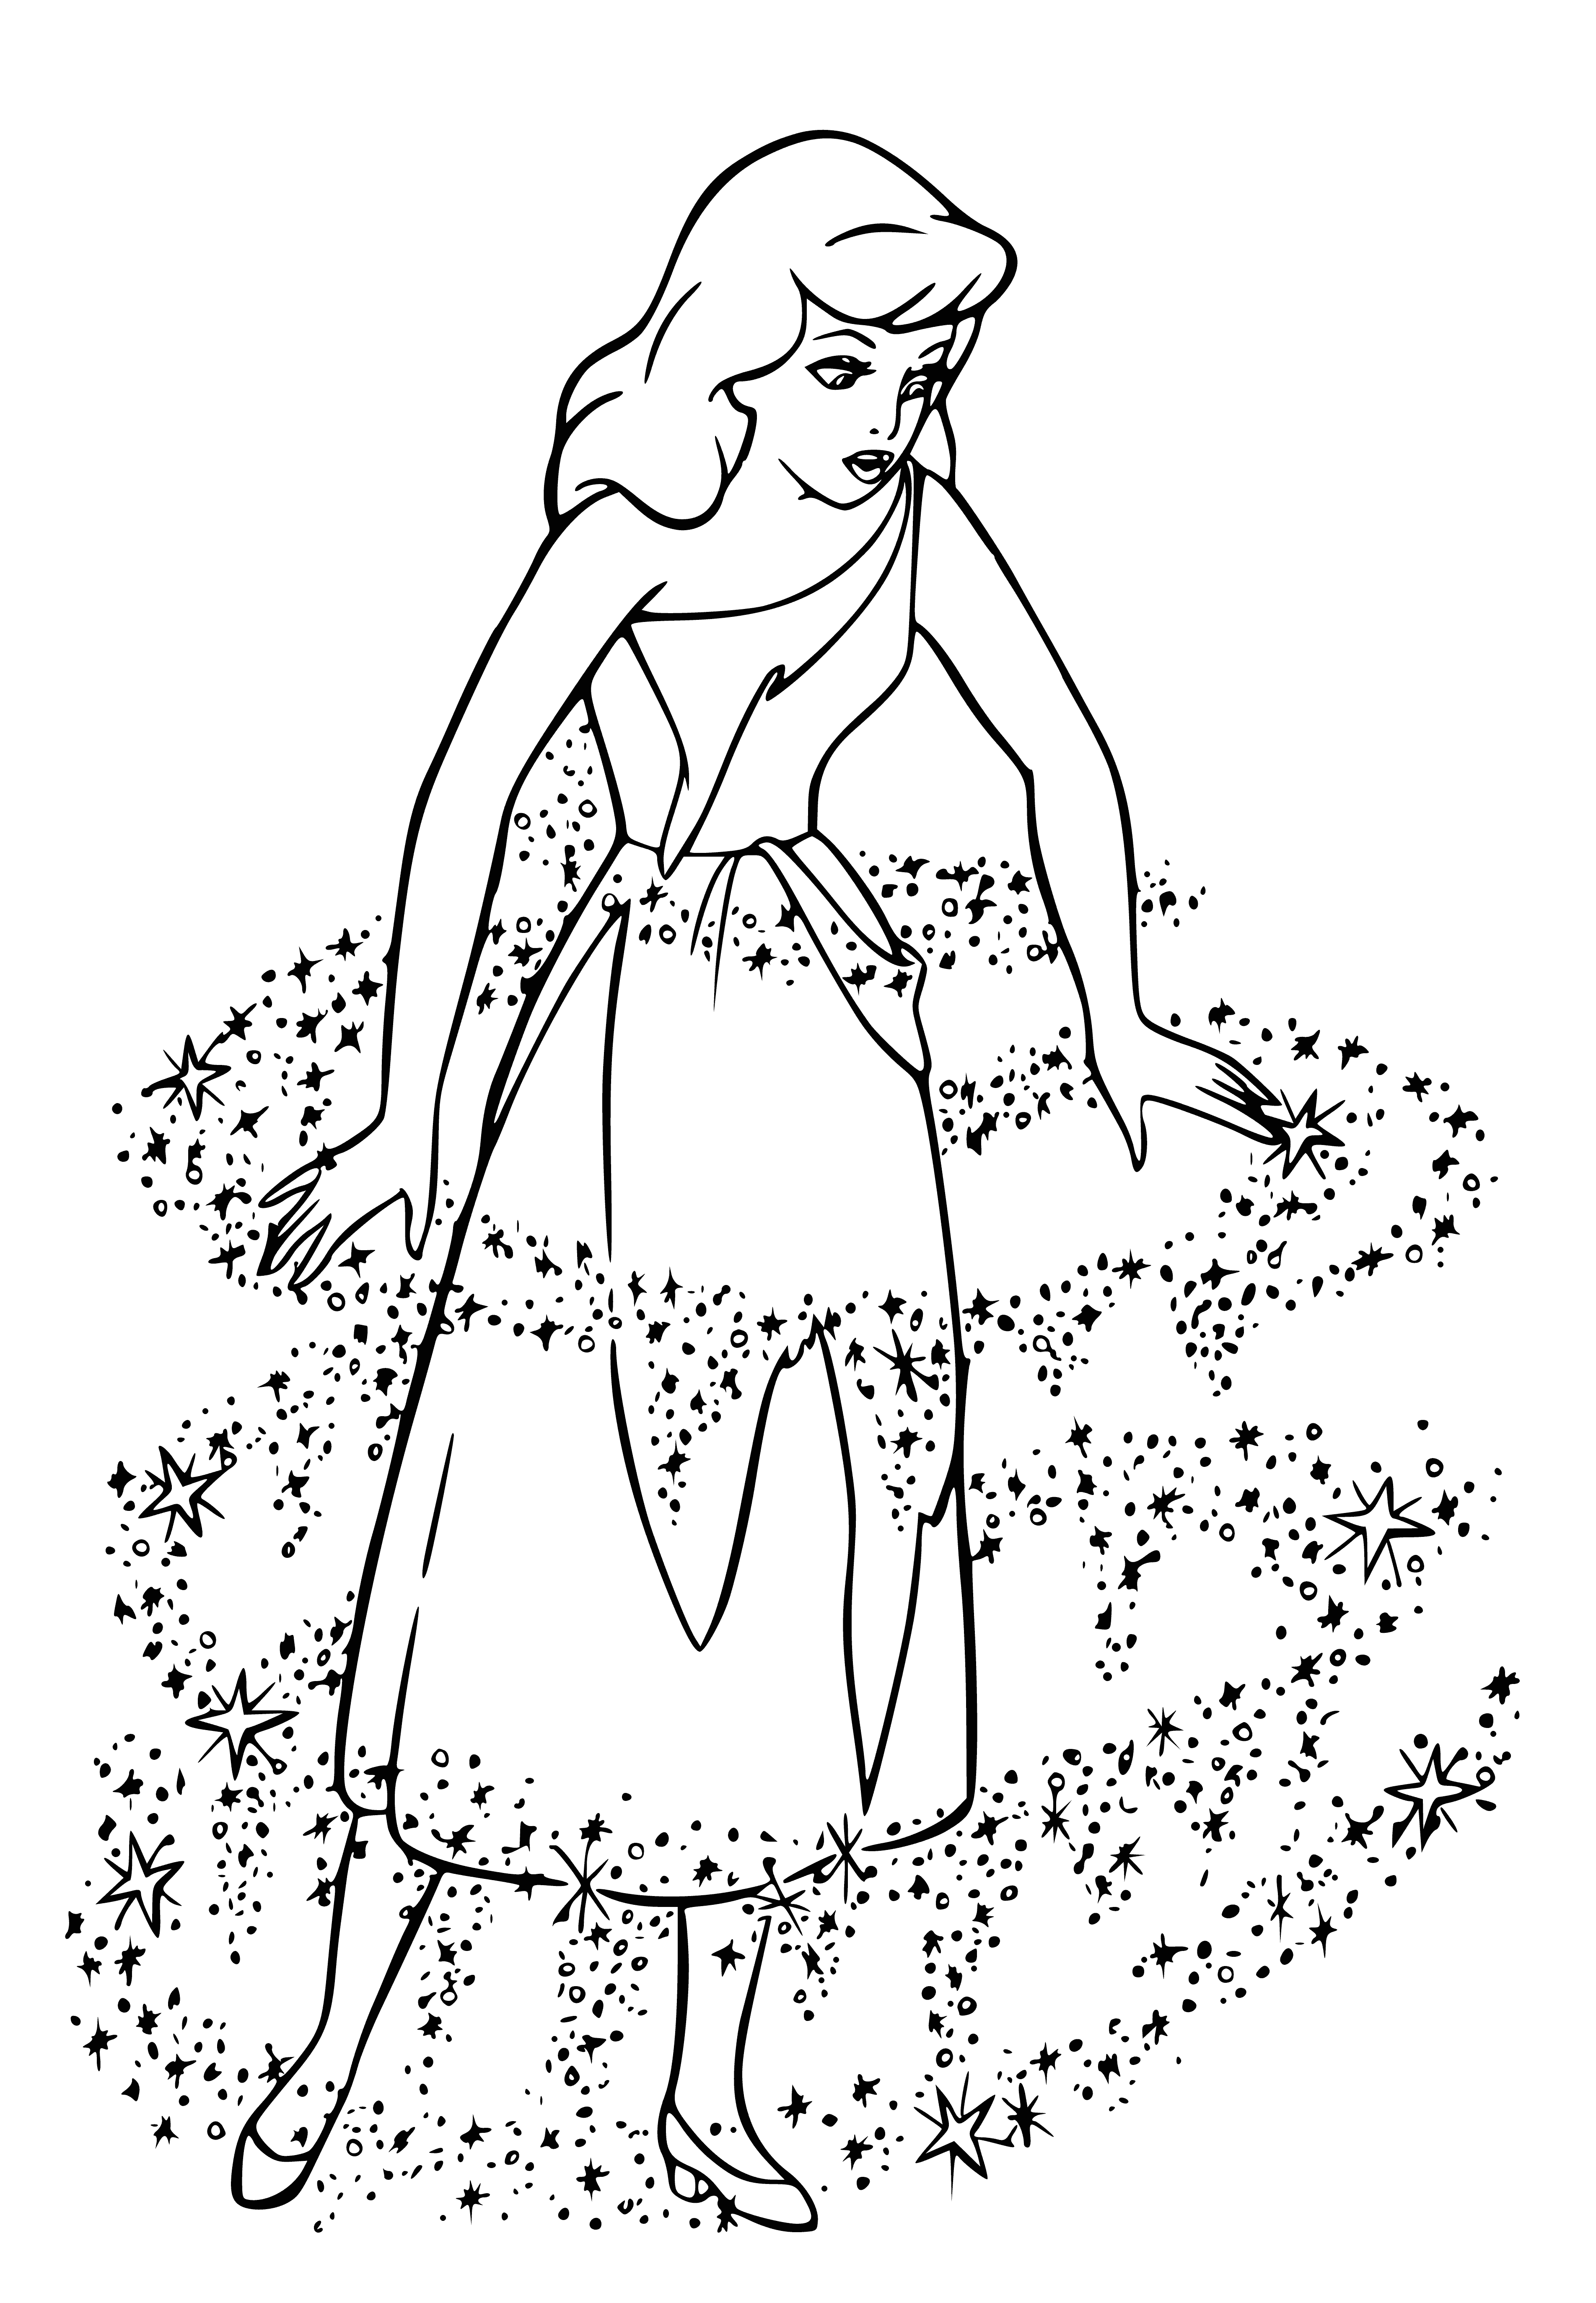 coloring page: Cinderella smiles, exhausted but hopeful, as her fairy godmother arrives to encourage her dreams.